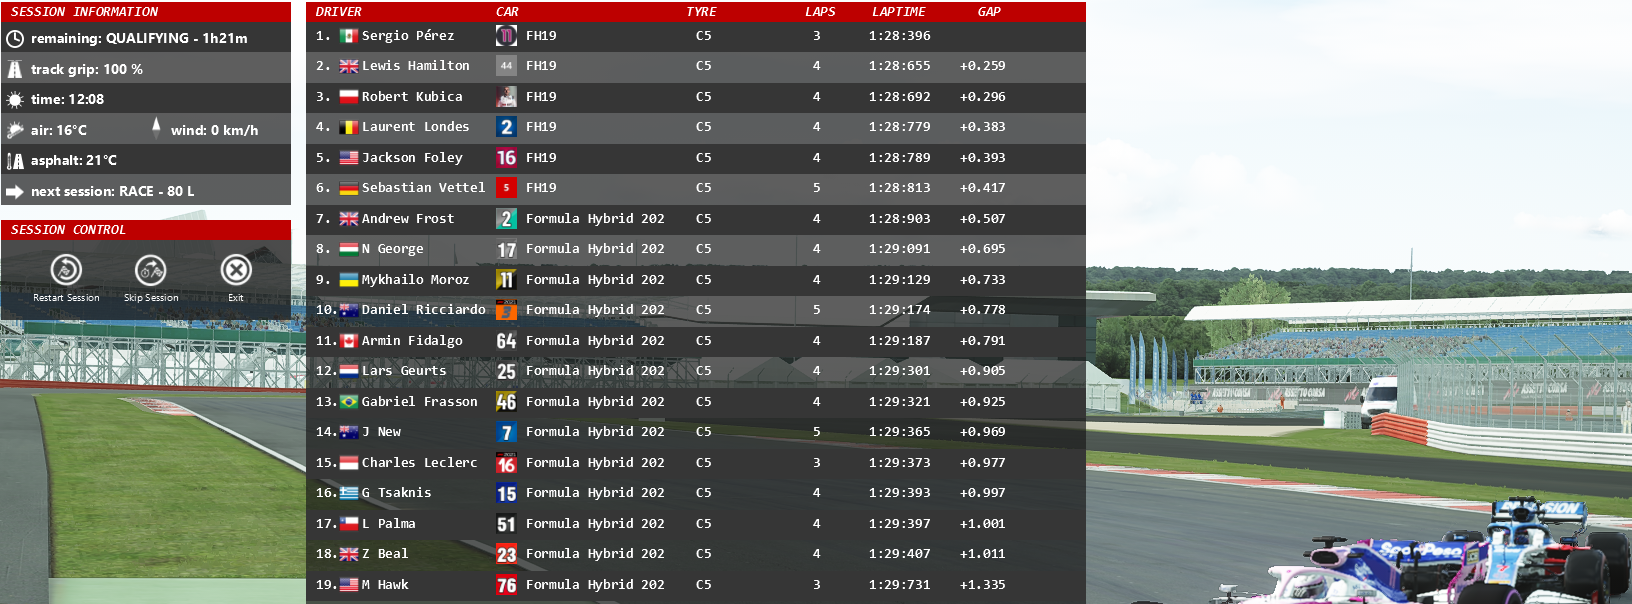 silverstone qualy.PNG